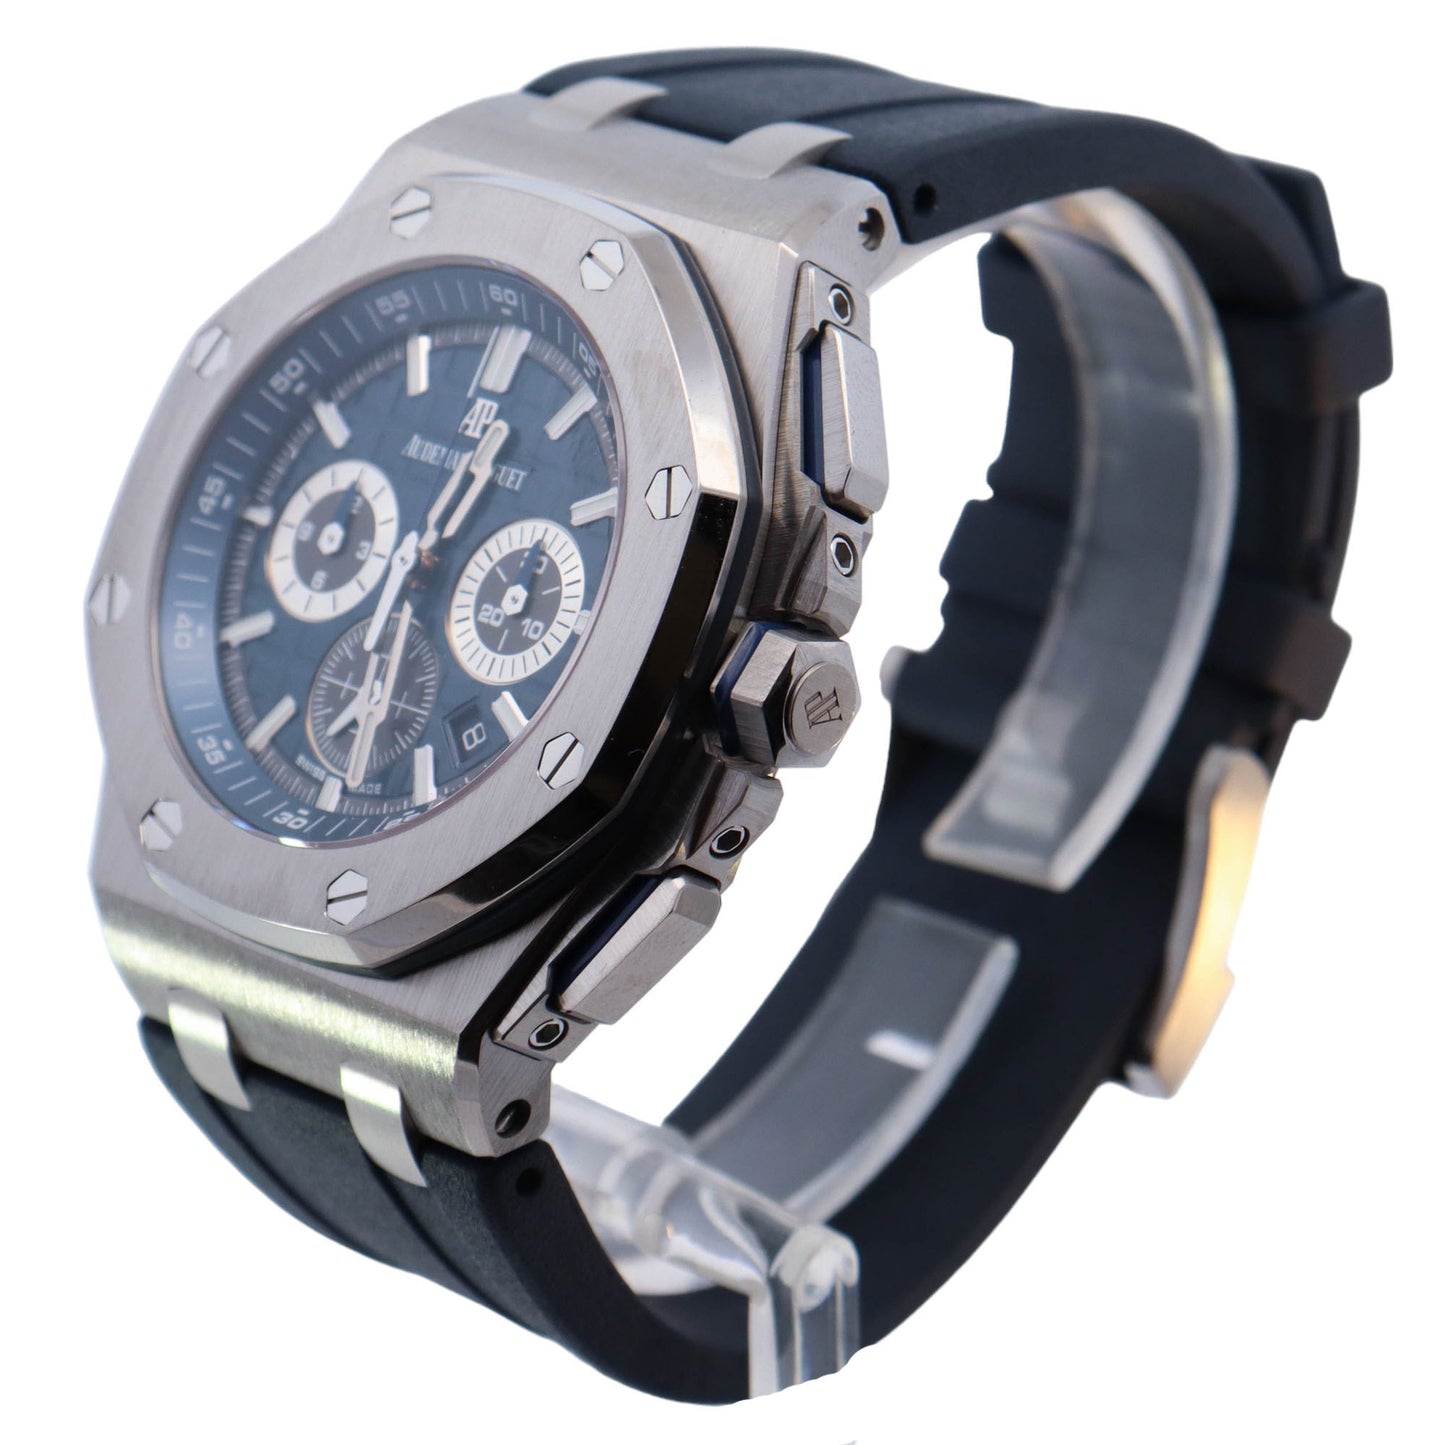 Audemars Piguet Royal Oak Offshore Titanium 42mm Blue Chronograph Dial Watch Reference# 26480TI.OO.A027CA.01 - Happy Jewelers Fine Jewelry Lifetime Warranty